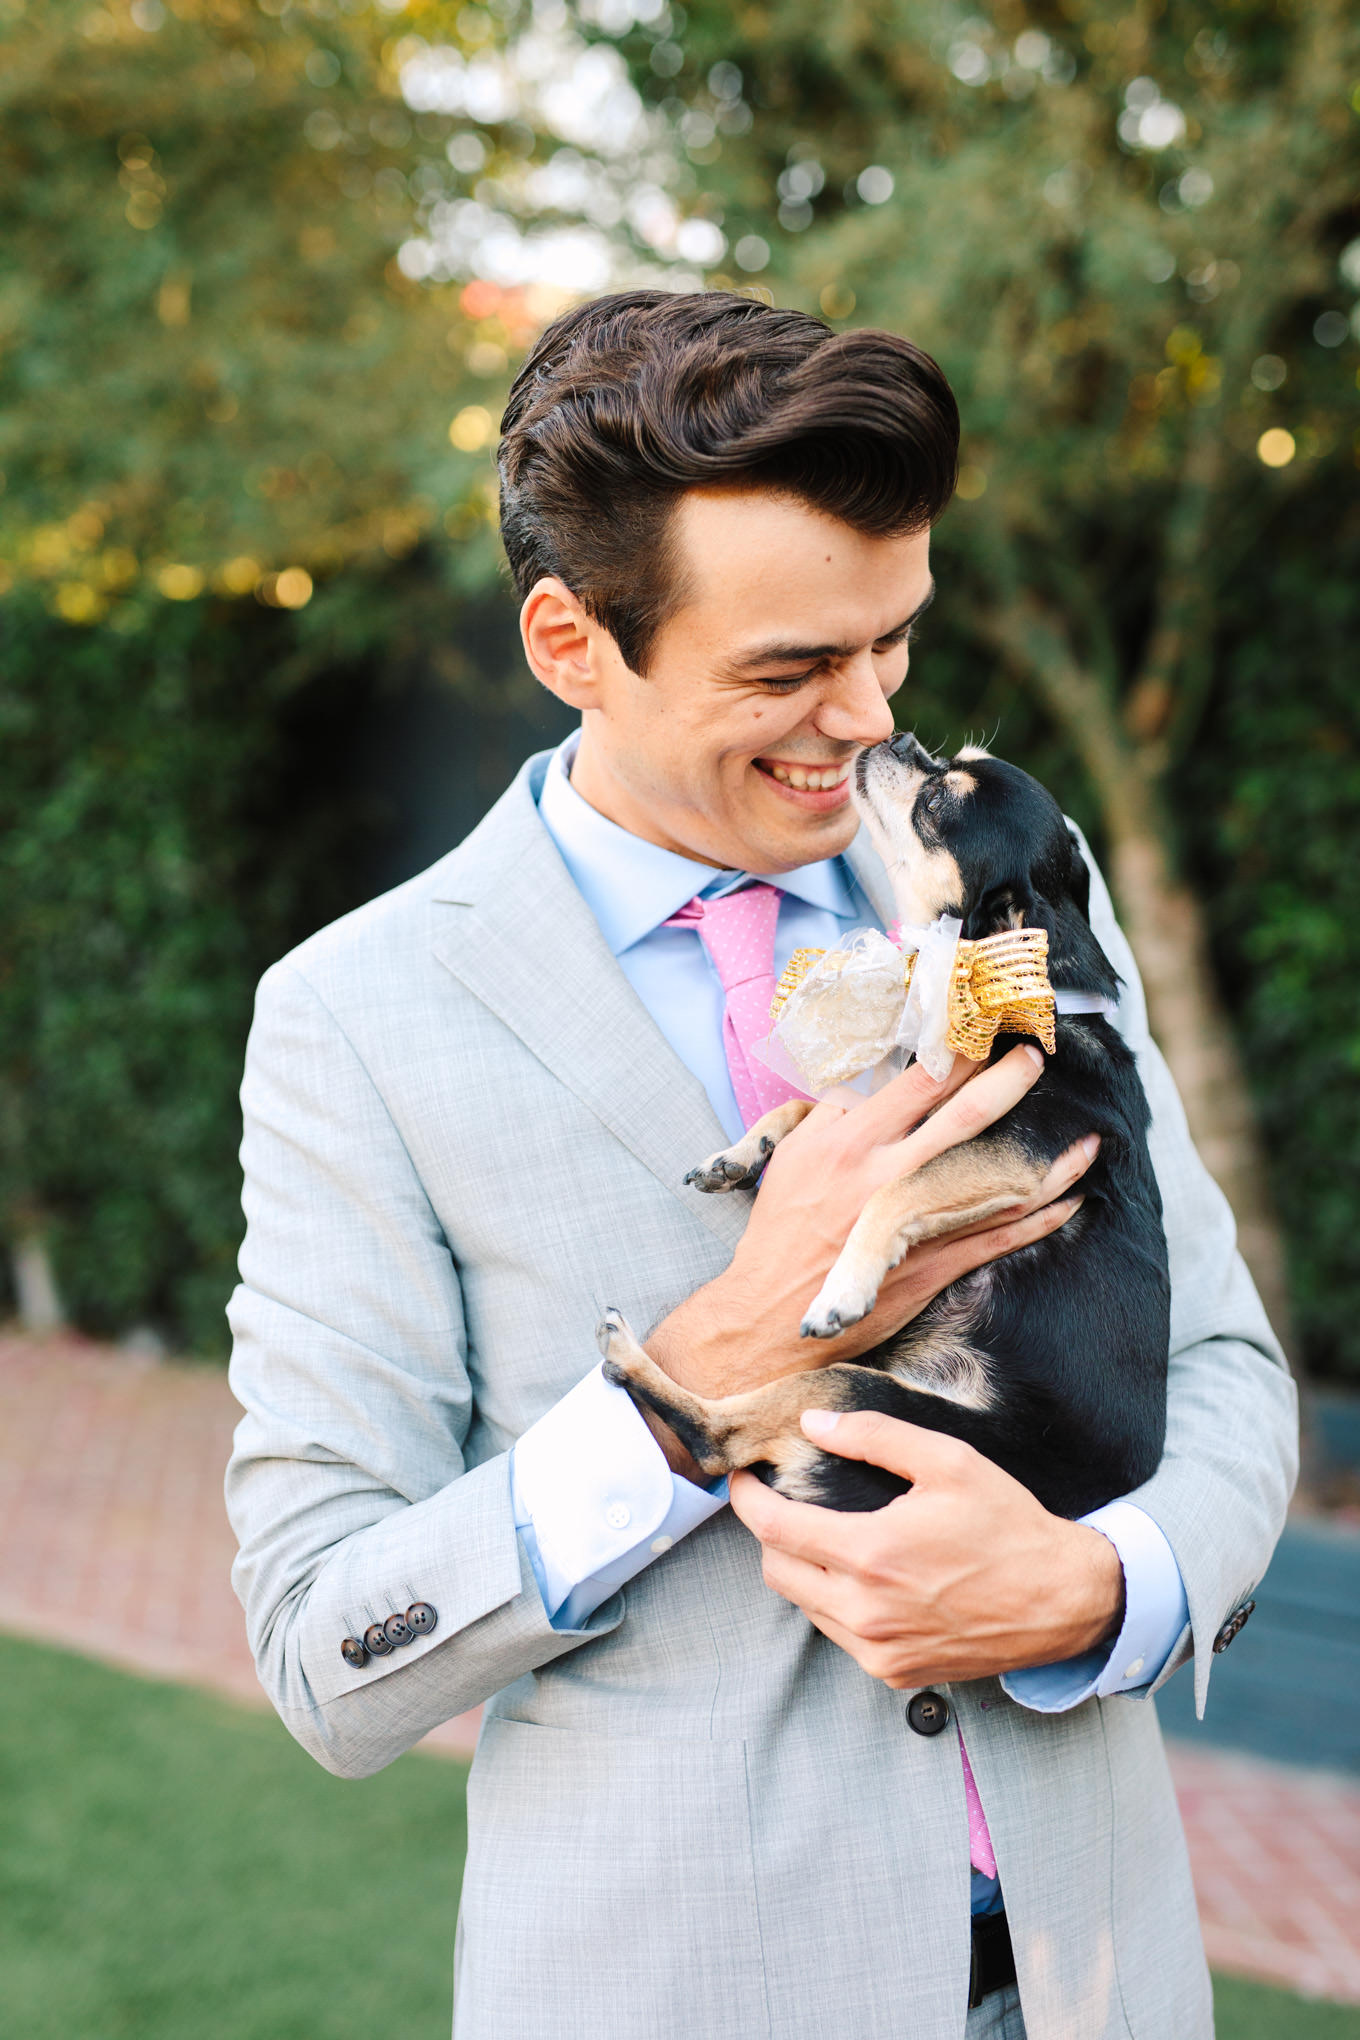 Groom with puppy | Colorful pop-up micro wedding at The Ruby Street Los Angeles featured on Green Wedding Shoes | Colorful and elevated photography for fun-loving couples in Southern California | #colorfulwedding #popupwedding #weddingphotography #microwedding Source: Mary Costa Photography | Los Angeles